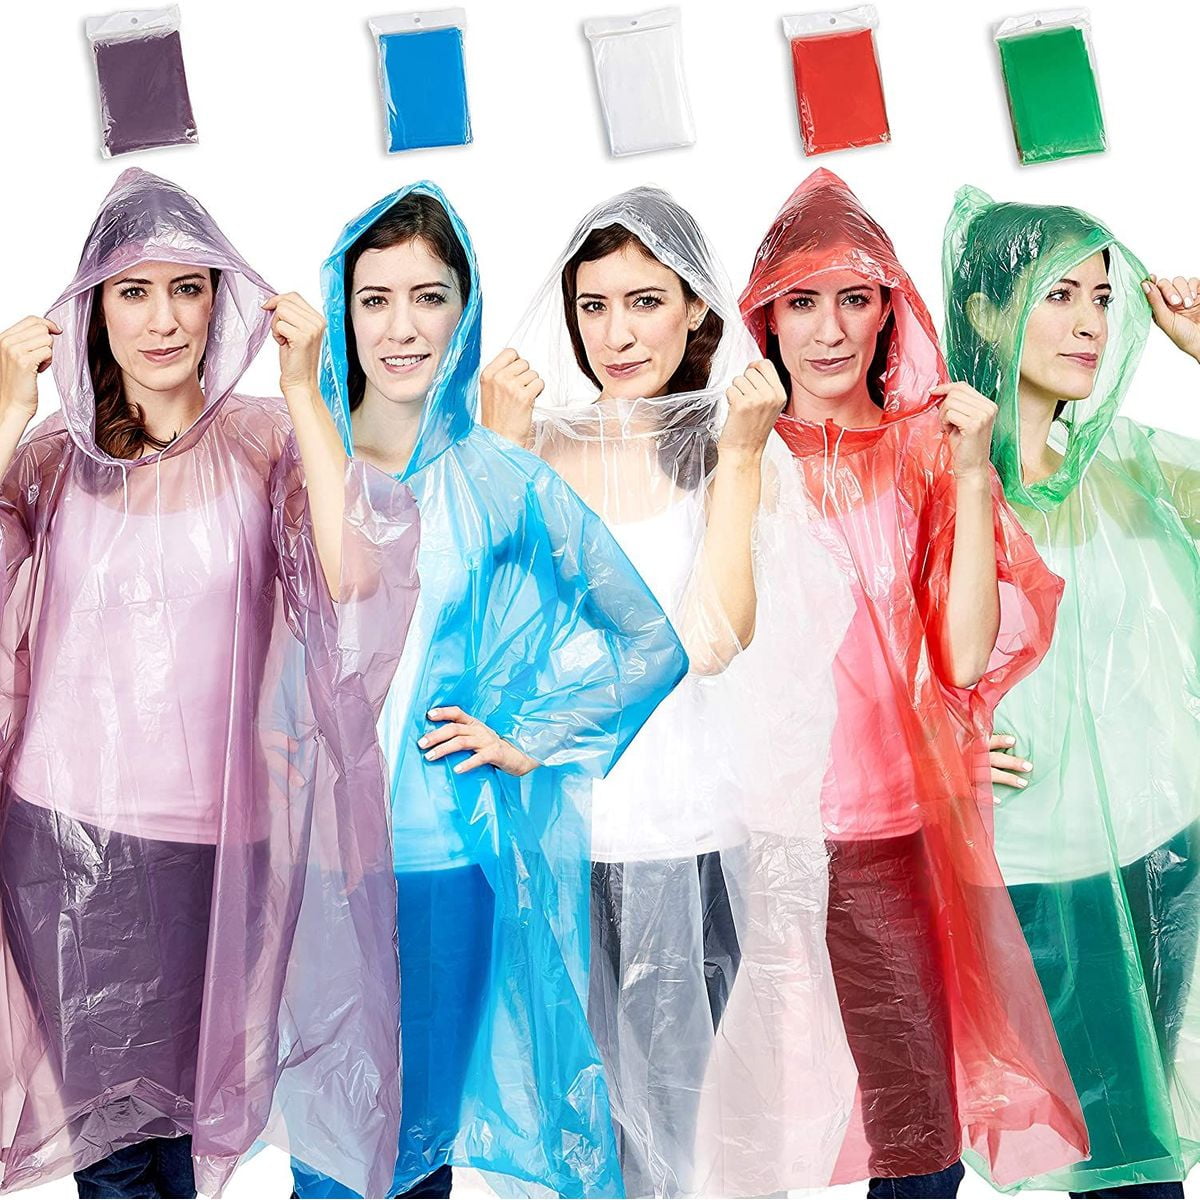 eBuyGB Pack of 4 Adult Emergency Waterproof Rain Ponchos with Hoods Festivals Theme Parks